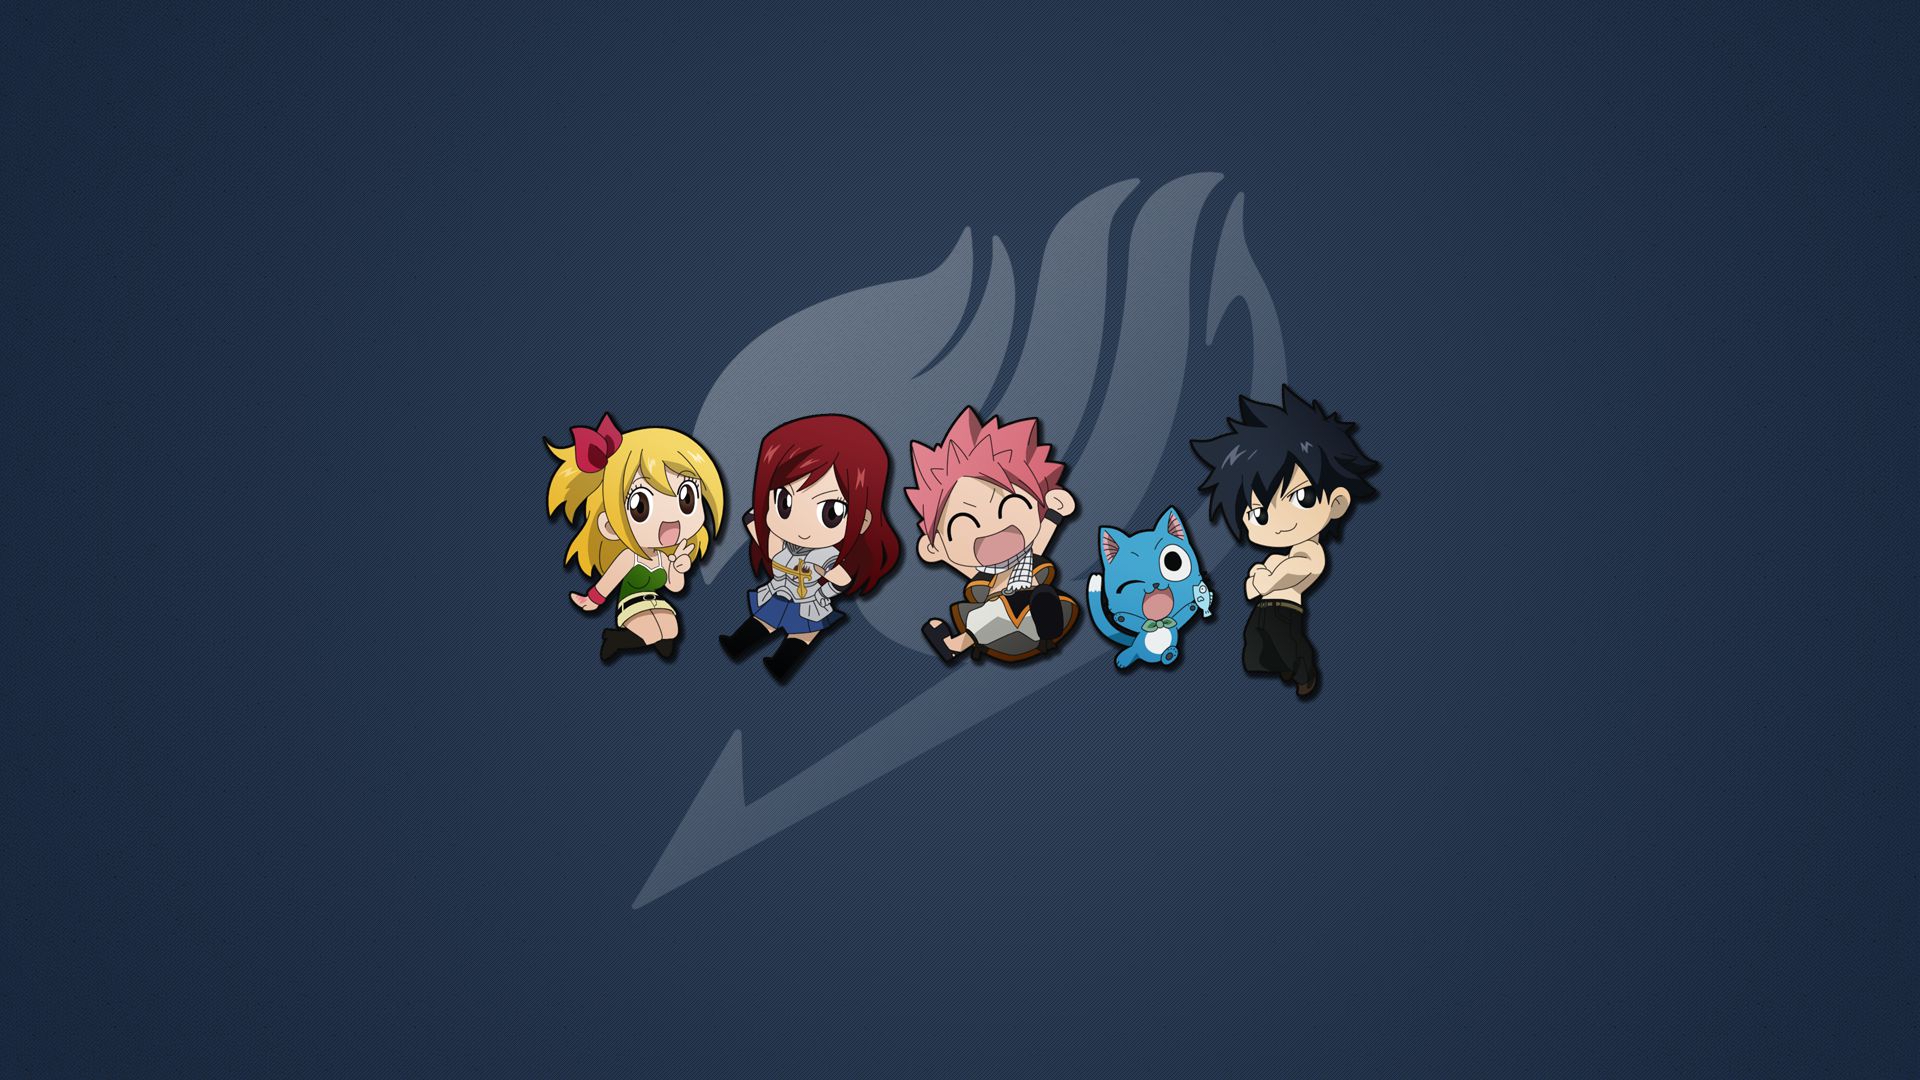 Fairy Tail Anime Wallpaper Full HD Free Download